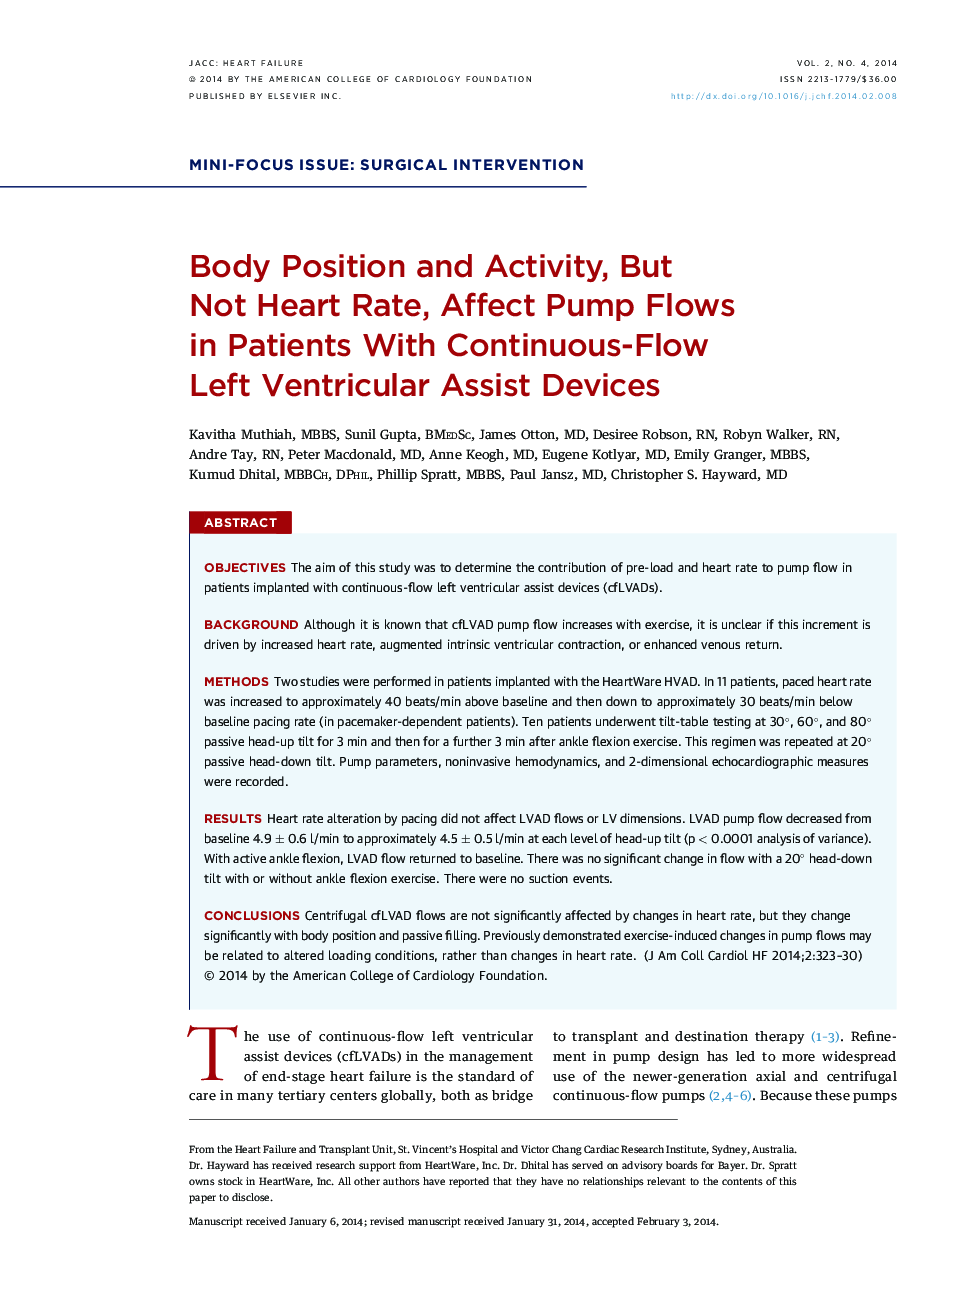 Body Position and Activity, But Not Heart Rate, Affect Pump Flows in Patients With Continuous-Flow Left Ventricular Assist Devices